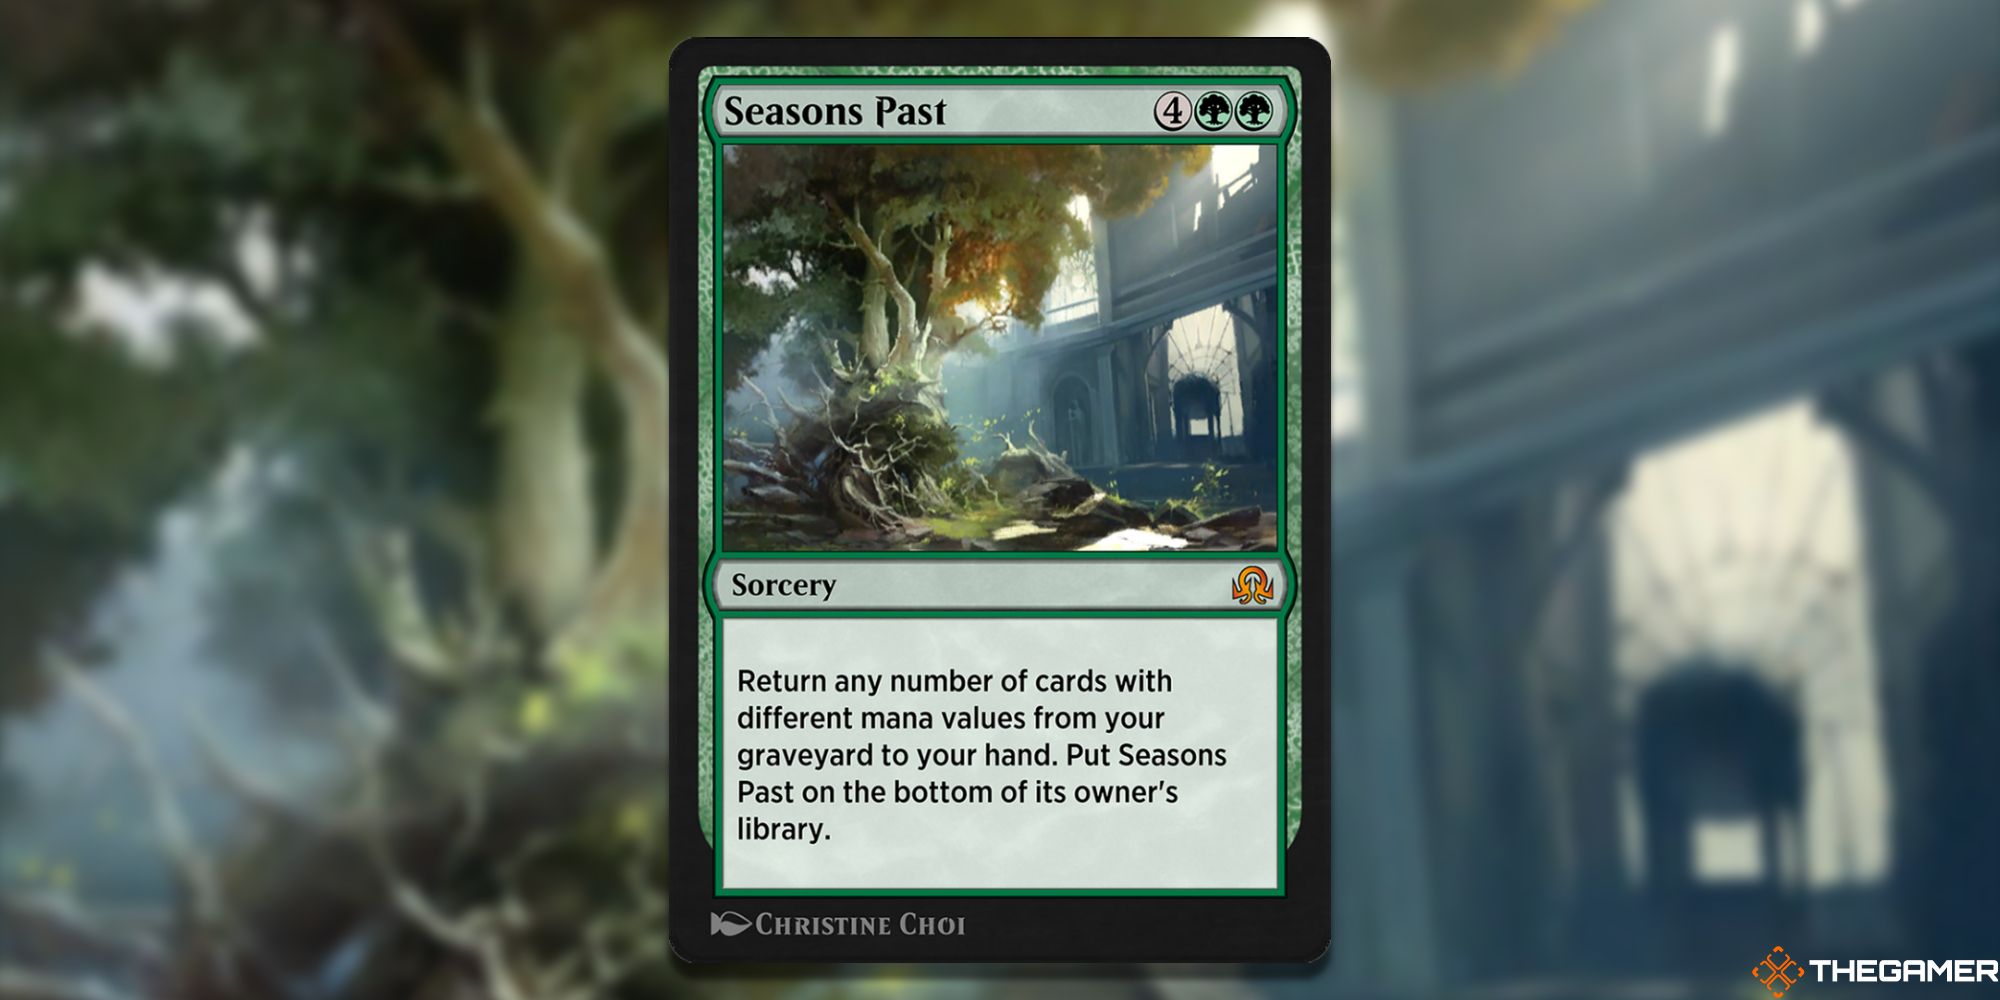 Image of the Seasons Past card in Magic: The Gathering, with art by Christine Choi